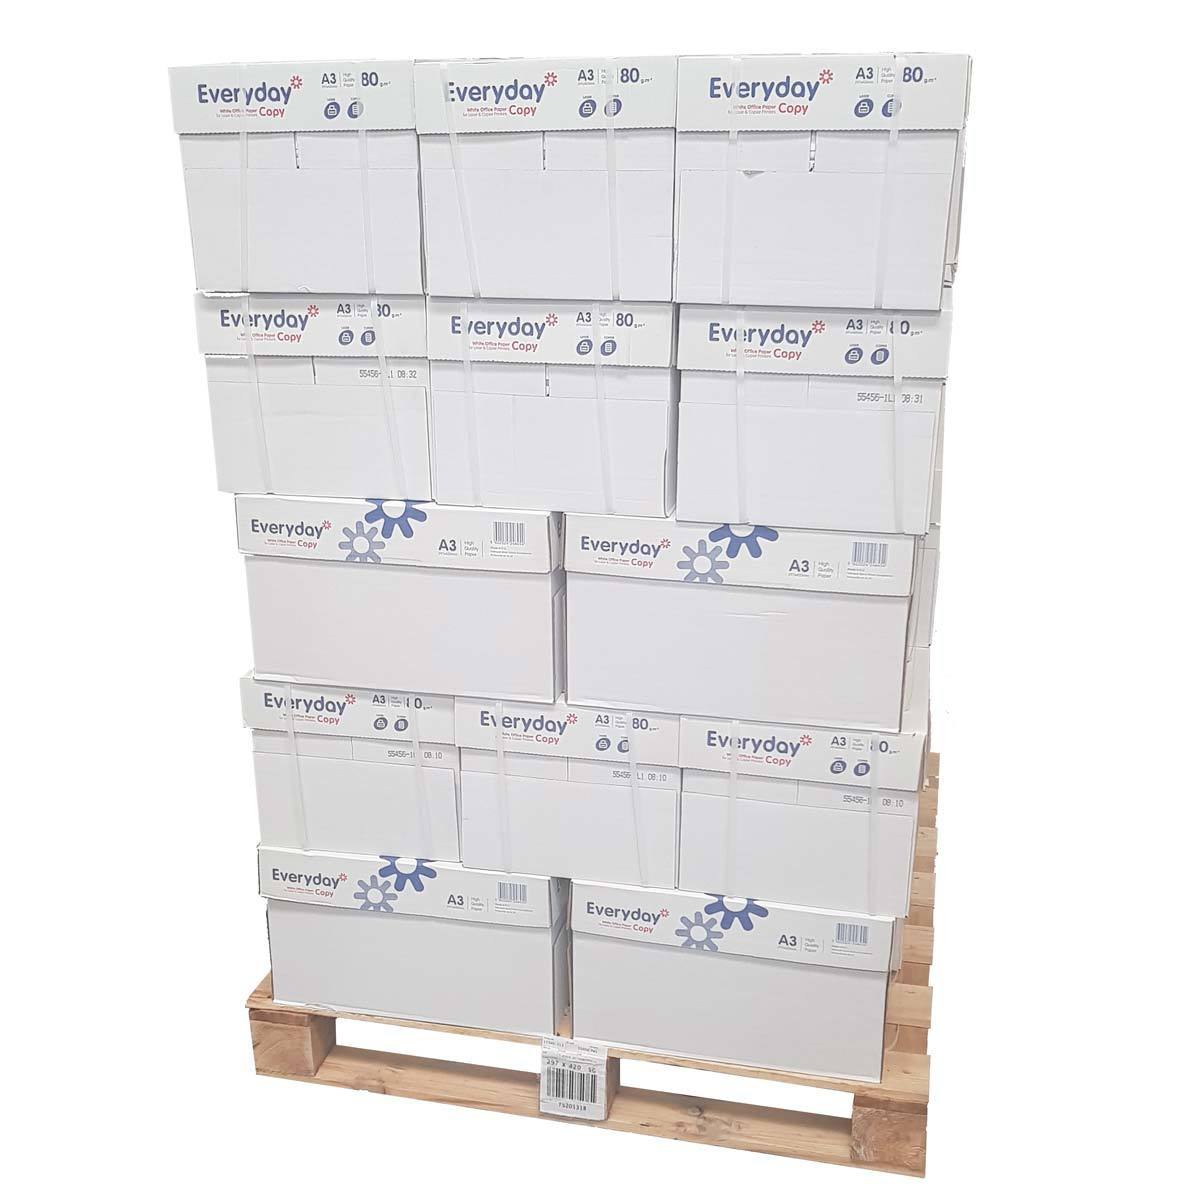 Everyday Copy A3 80gsm White Pallet of Paper - 80,000 sheets